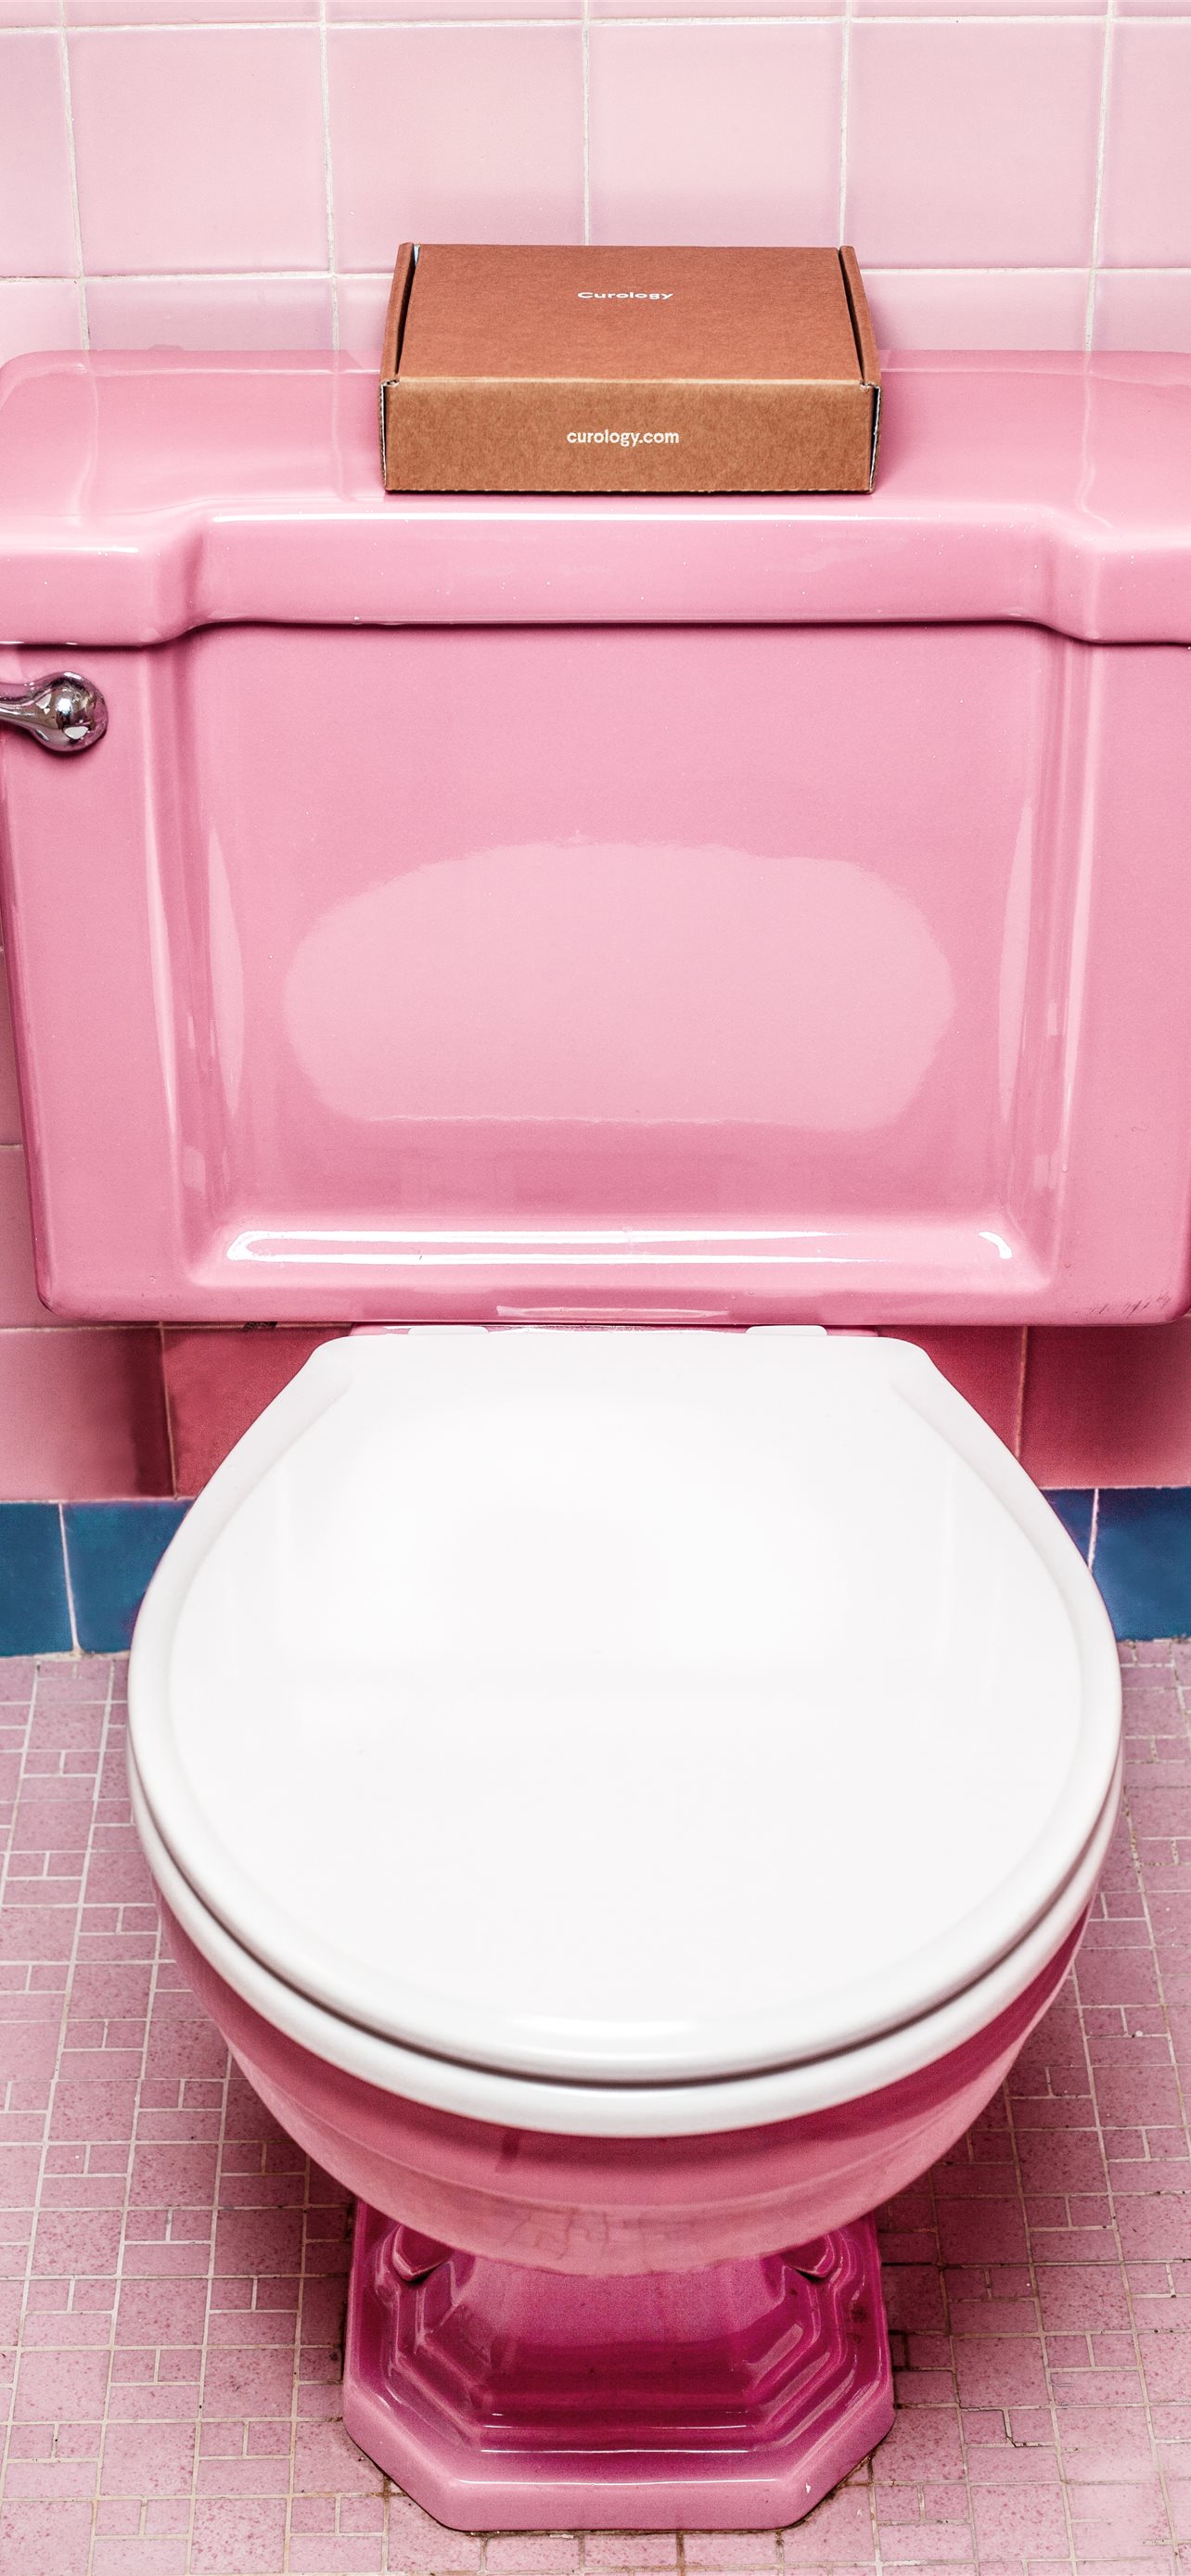 pink and white ceramic toilet bowl iPhone wallpaper 